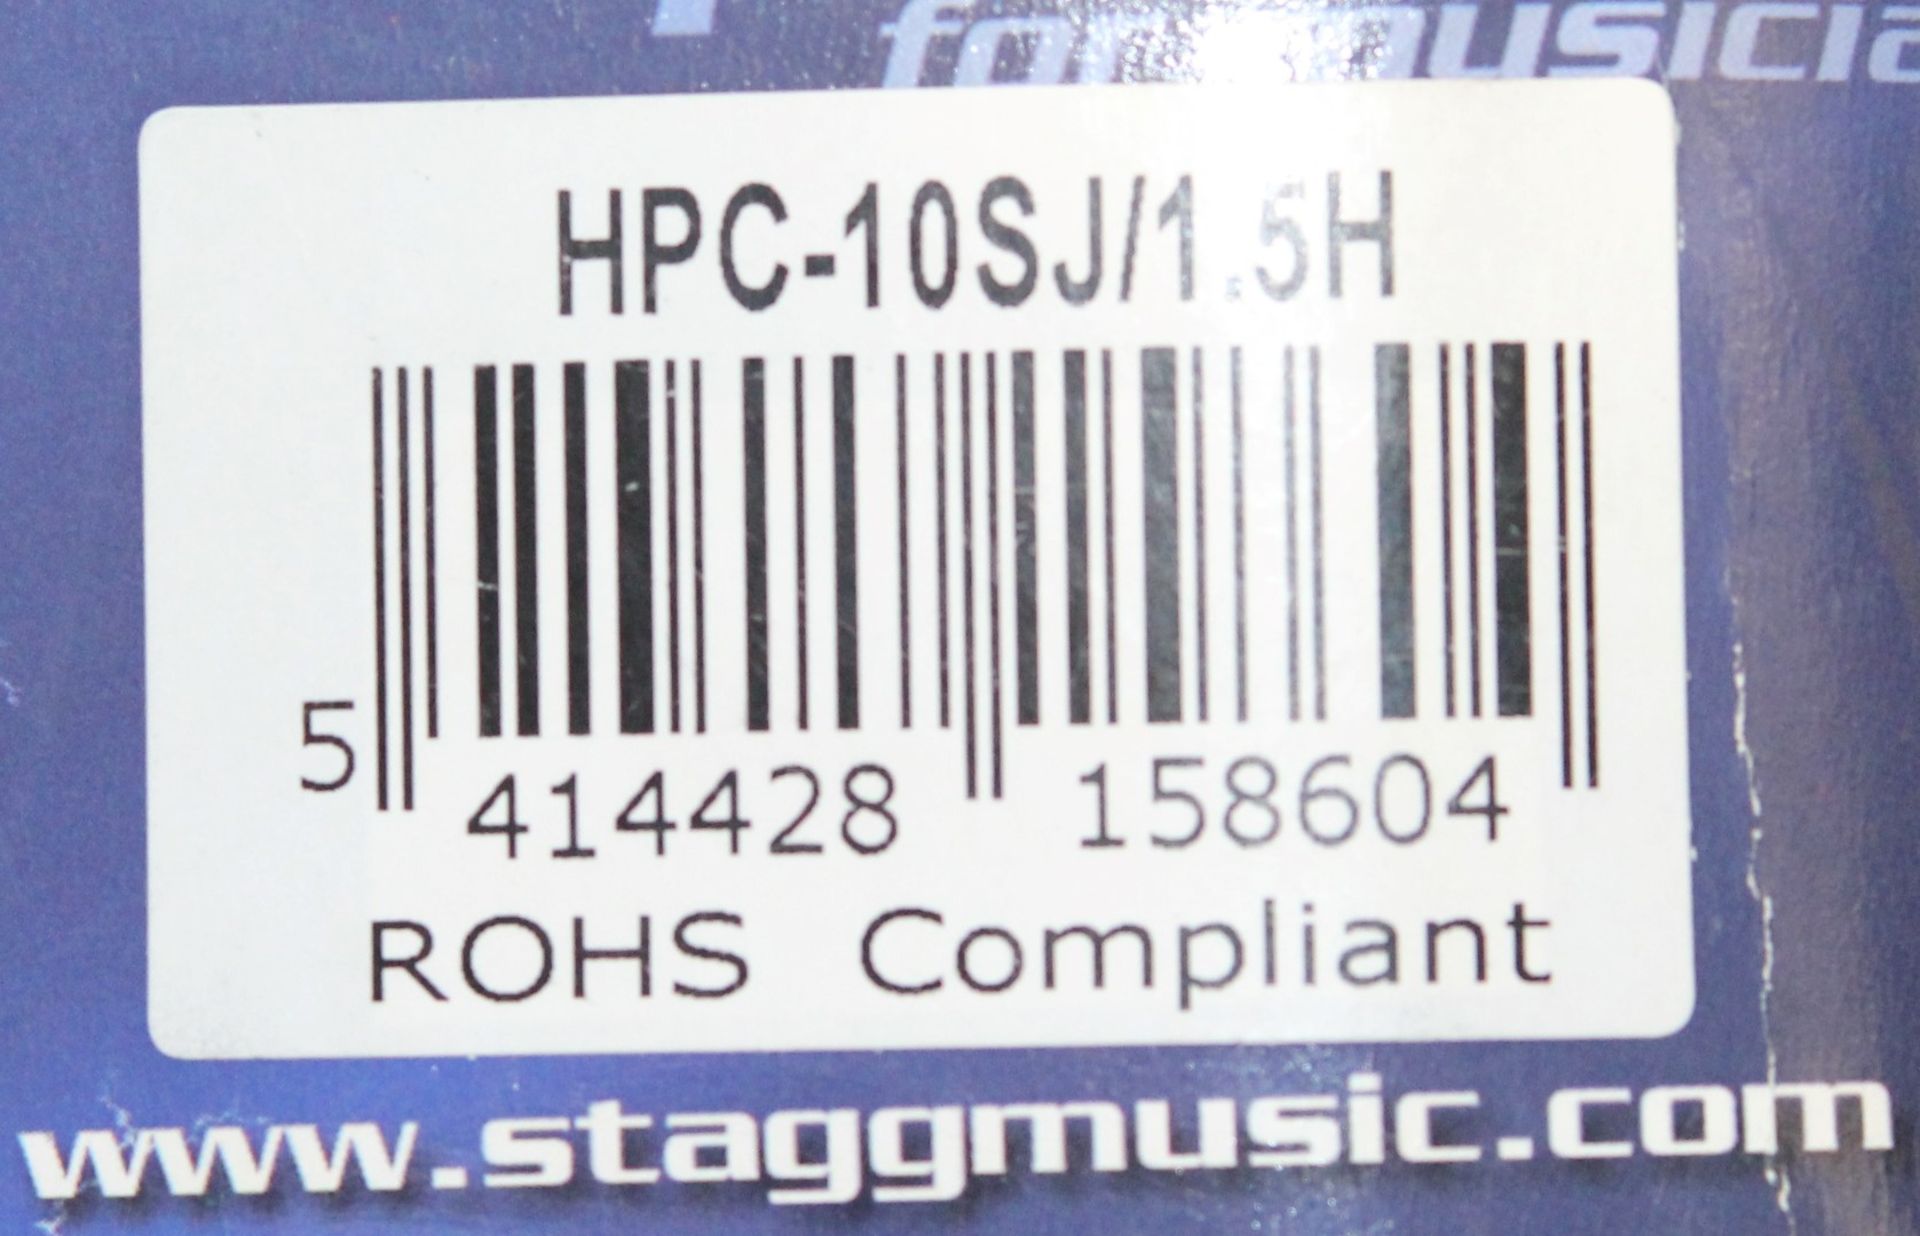 2 x Stagg 10 Metre Speaker Cables With Jack Plugs - Product Code HPC-10SJ/1.5H - Brand New Stock - - Image 4 of 4